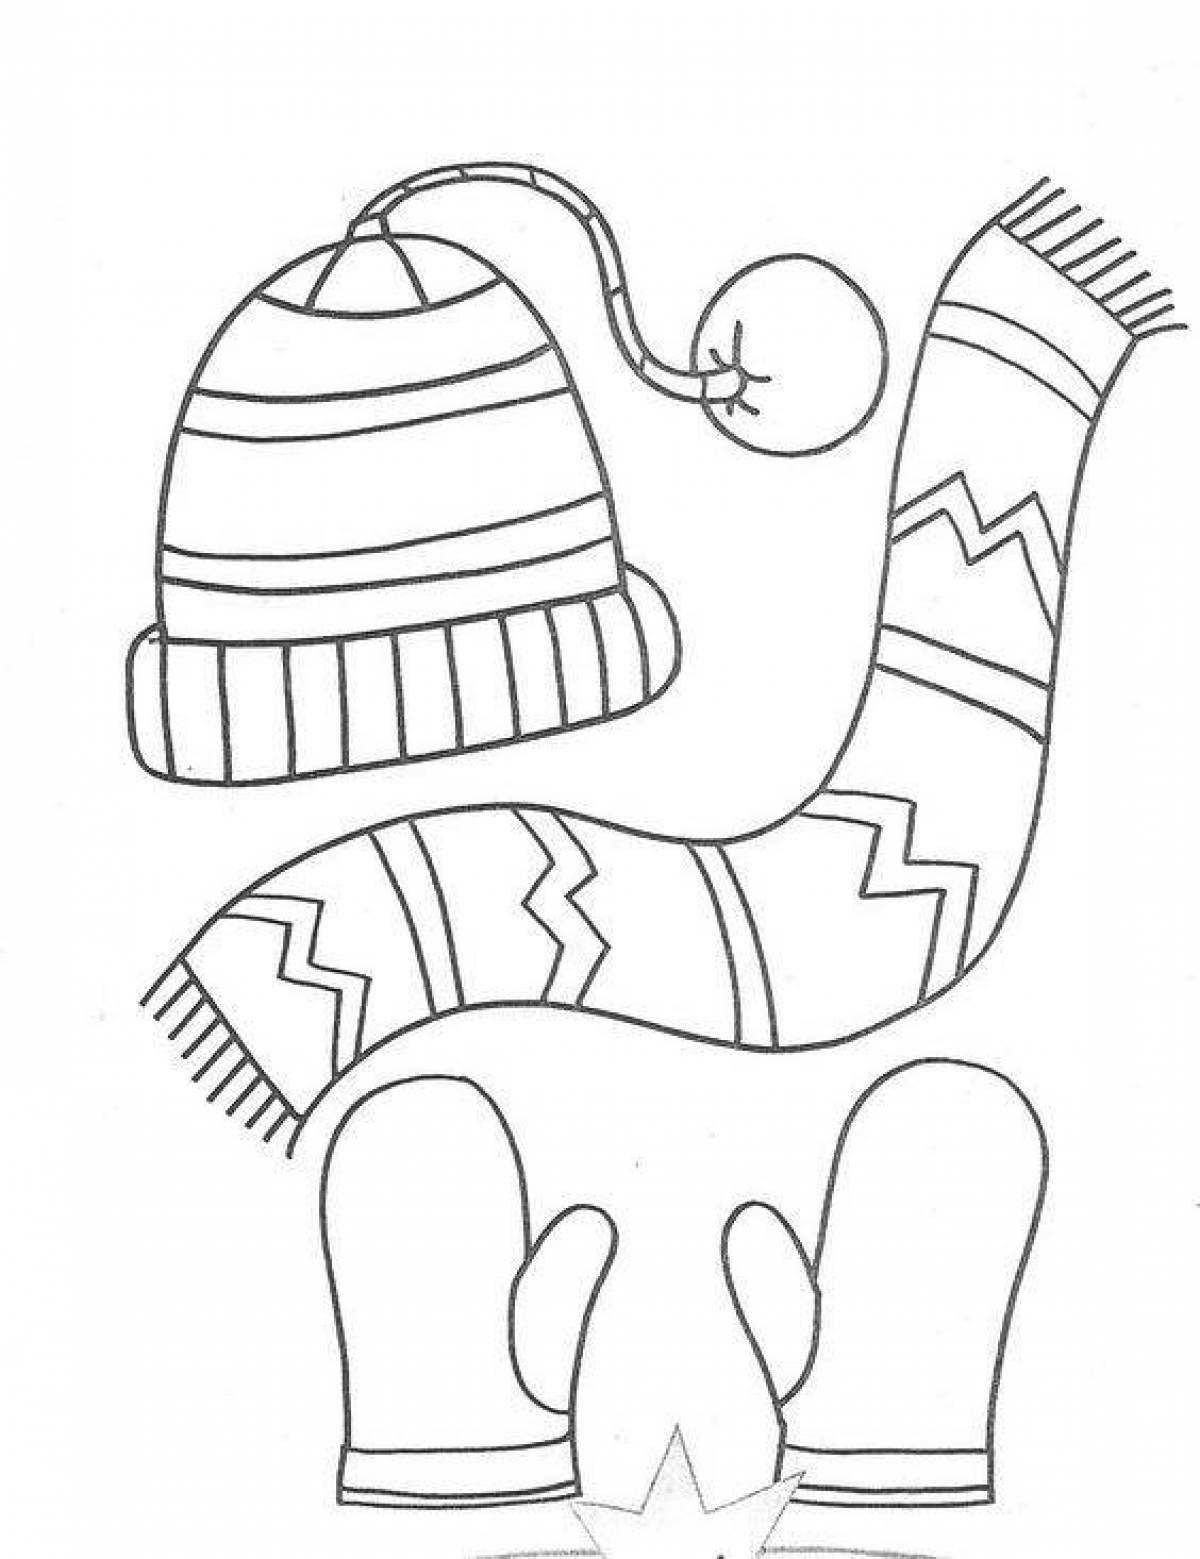 Minnie's amazing hat and scarf coloring page